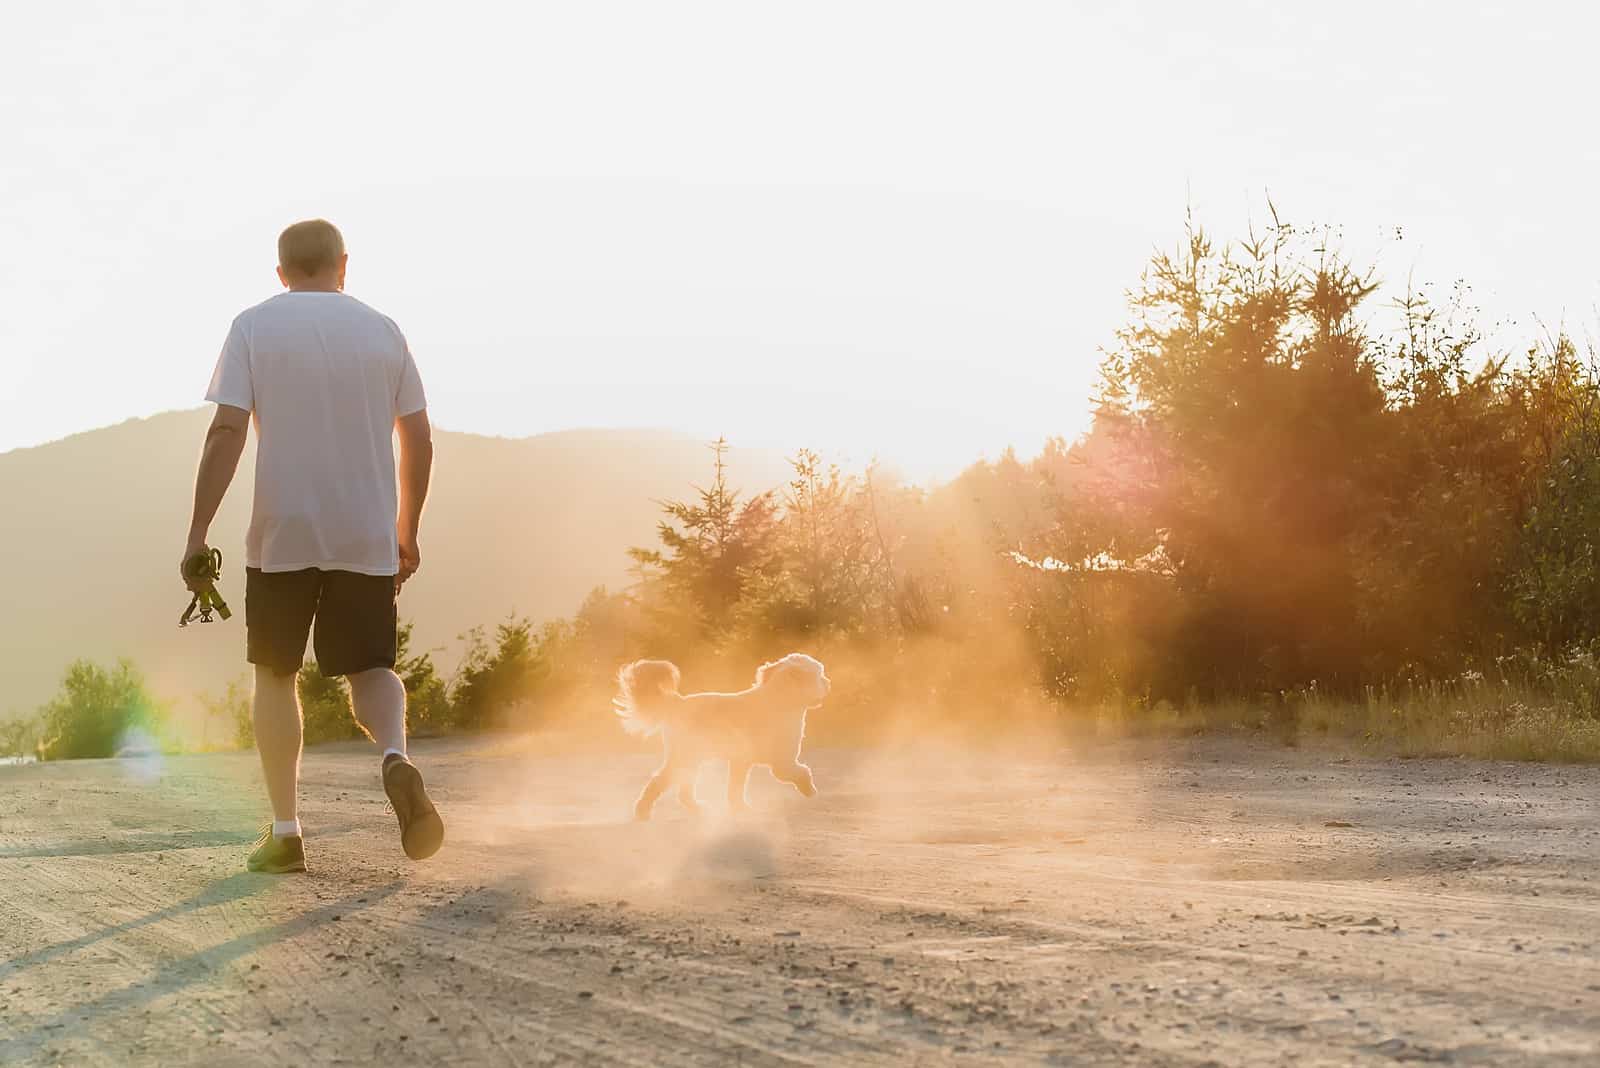 Man and dog walking into dusty sunset